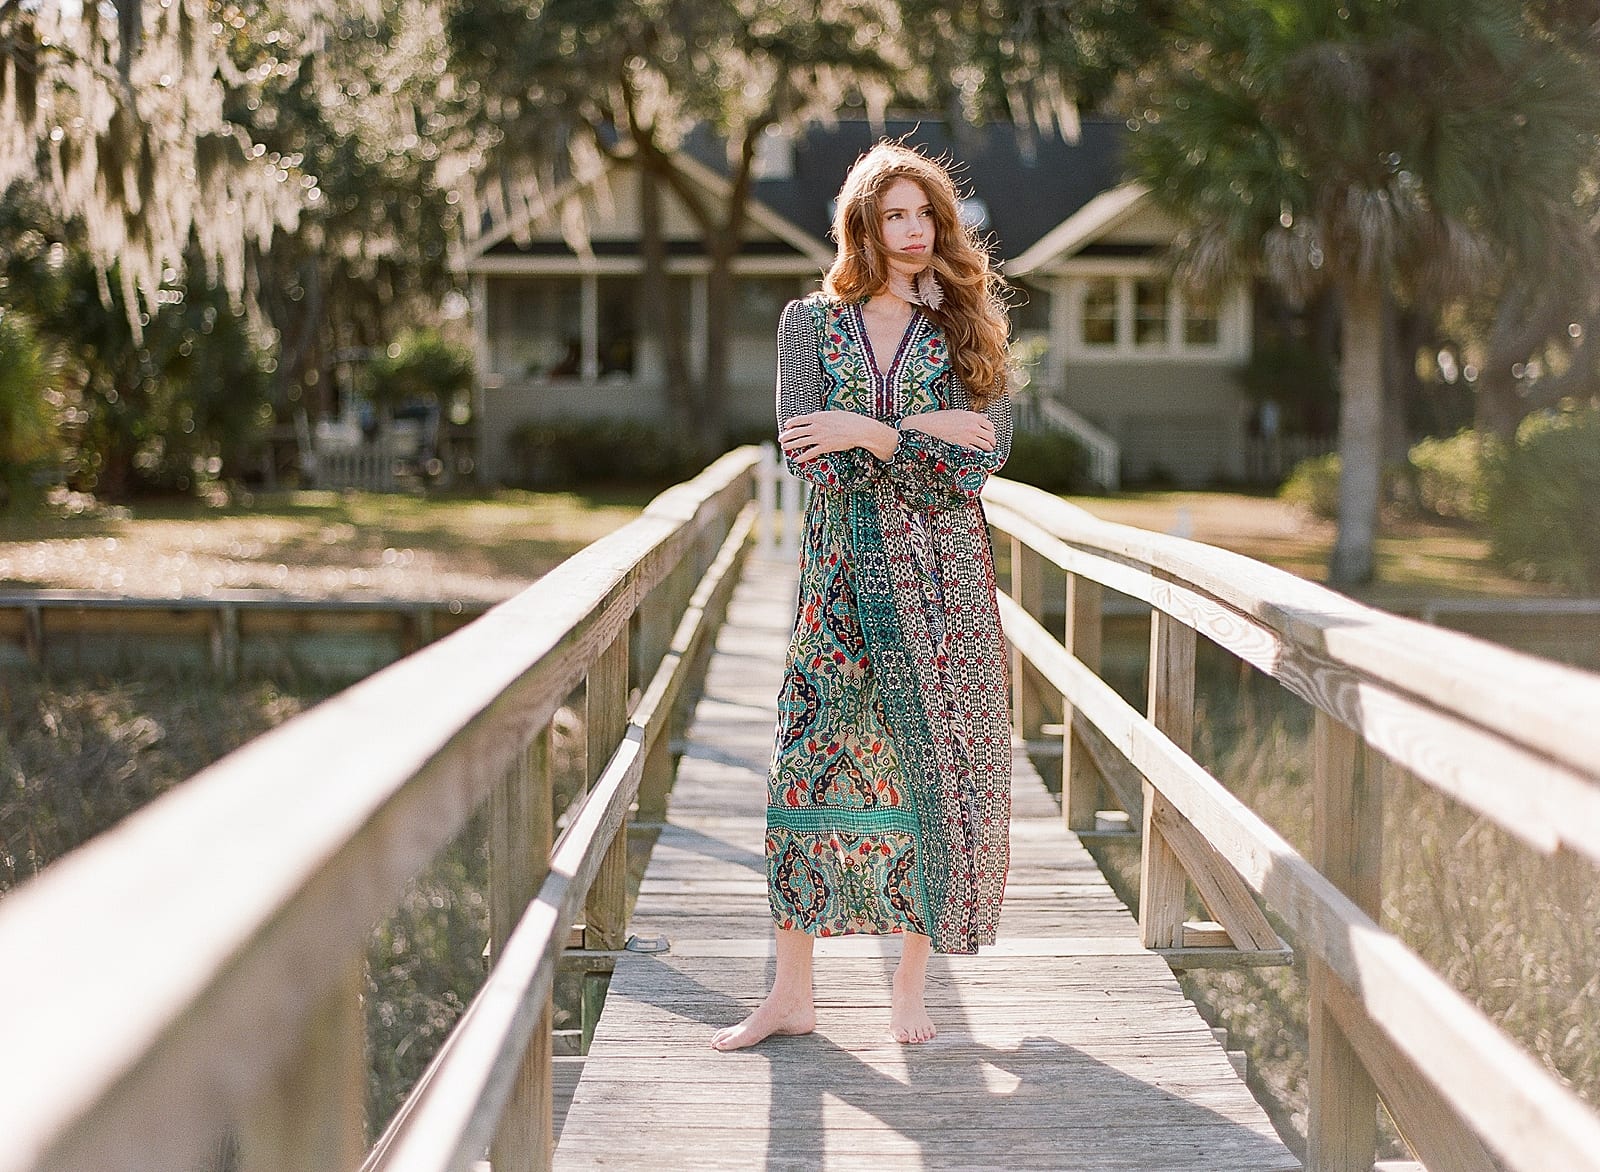 Beaufort SC Editorial - Honeymoon Outfit Ideas - McSween Photography